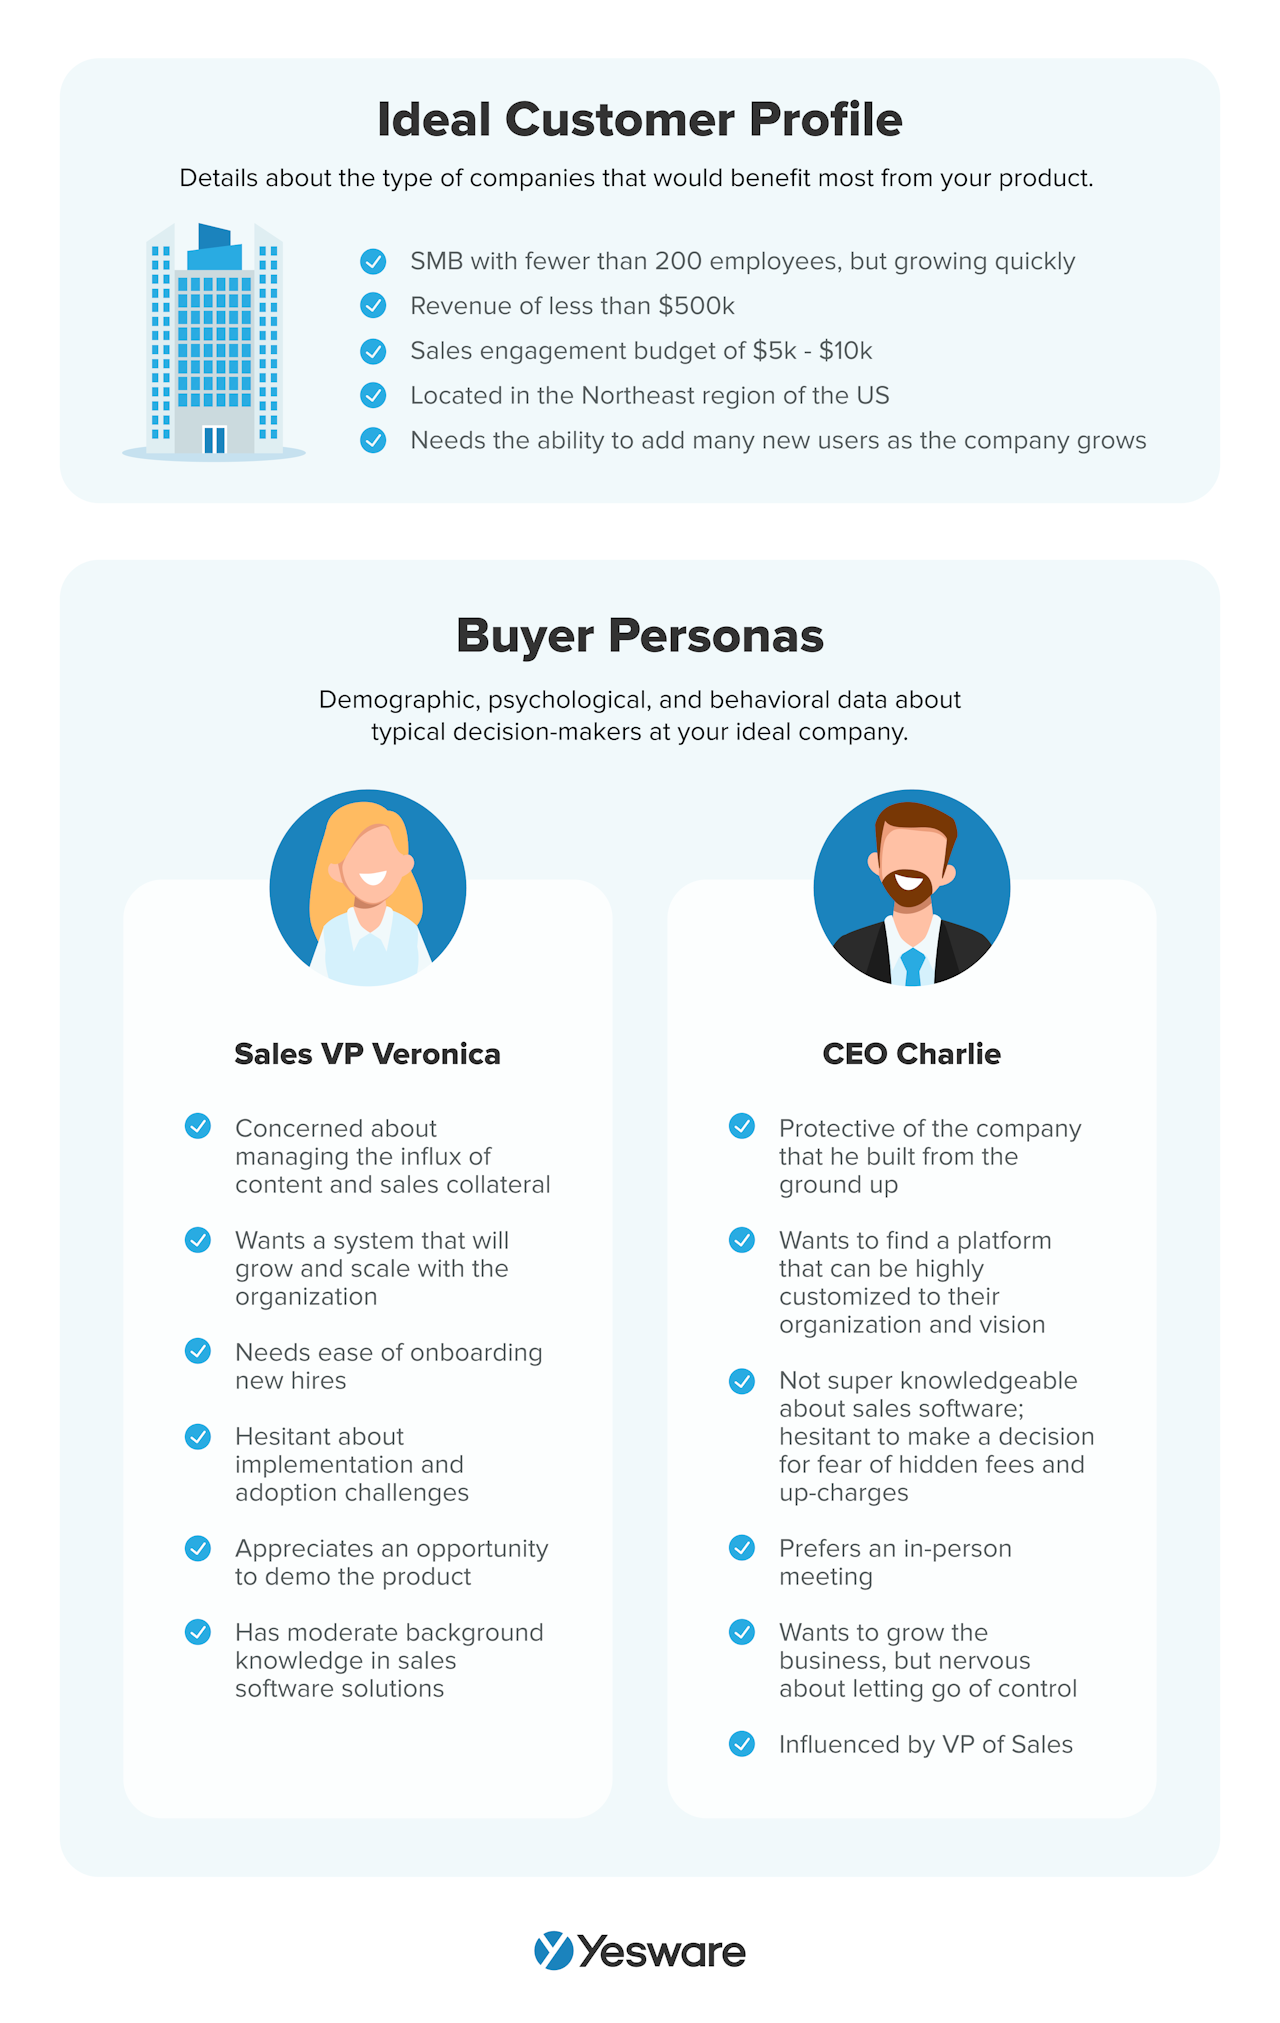 Lead Qualification: Ideal Customer Profile (ICP) and Buyer Personas